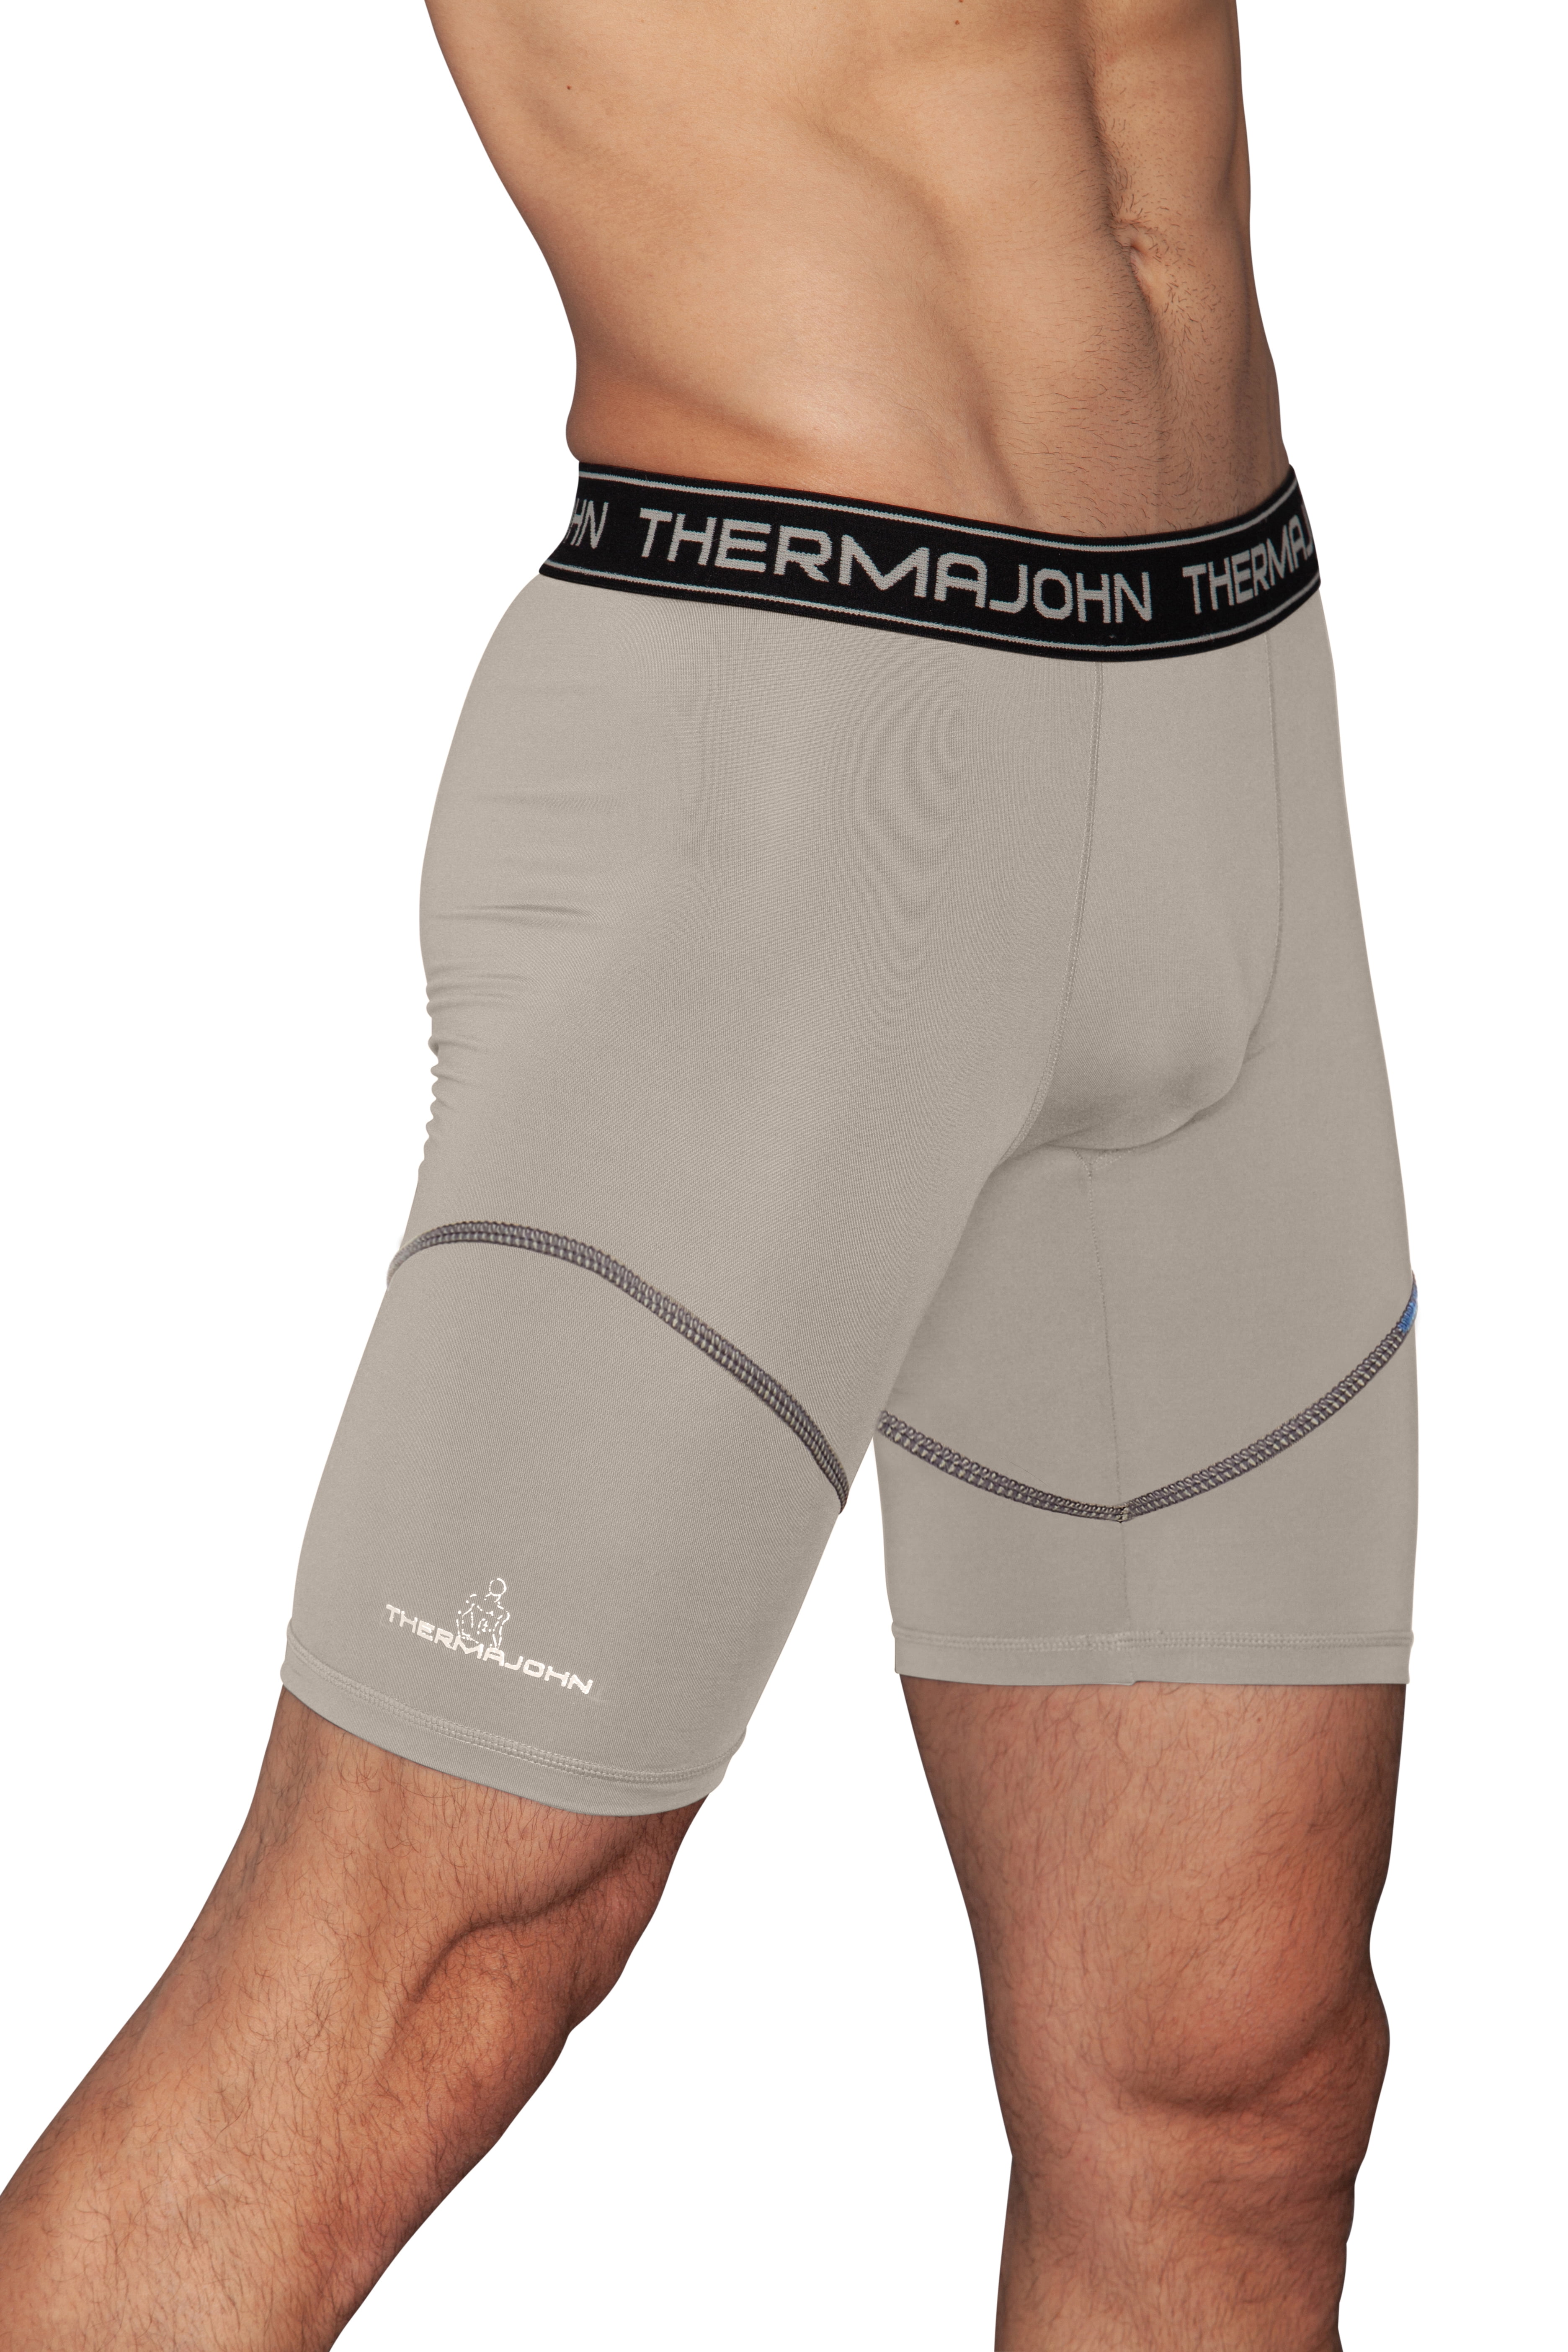 Thermajohn Mens Compression Shorts Underwear Cool & Quick Dry Athletic Shorts